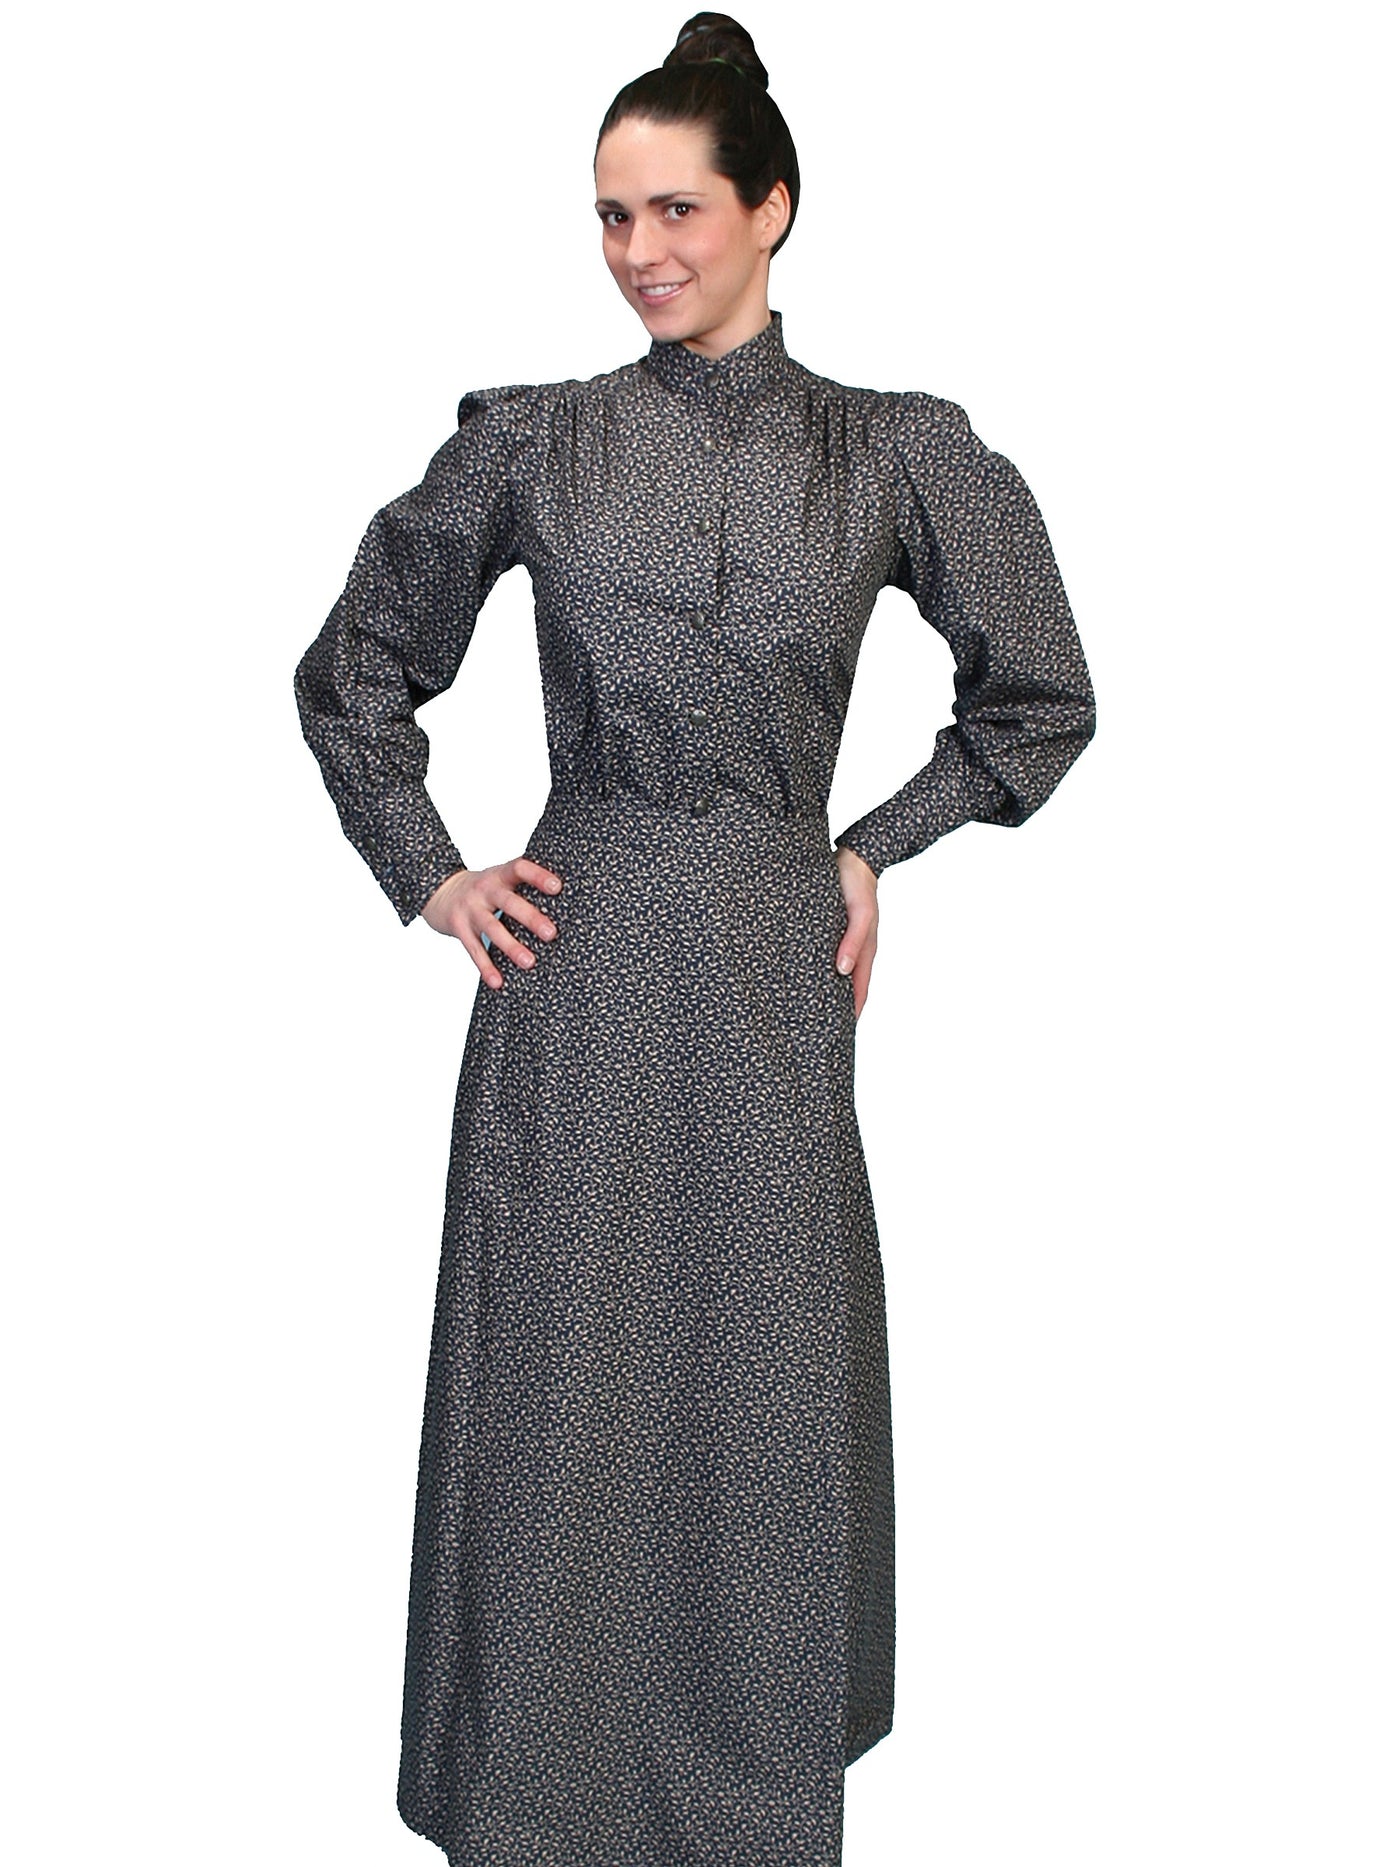 Victorian Style Walking Skirt in Navy - SOLD OUT